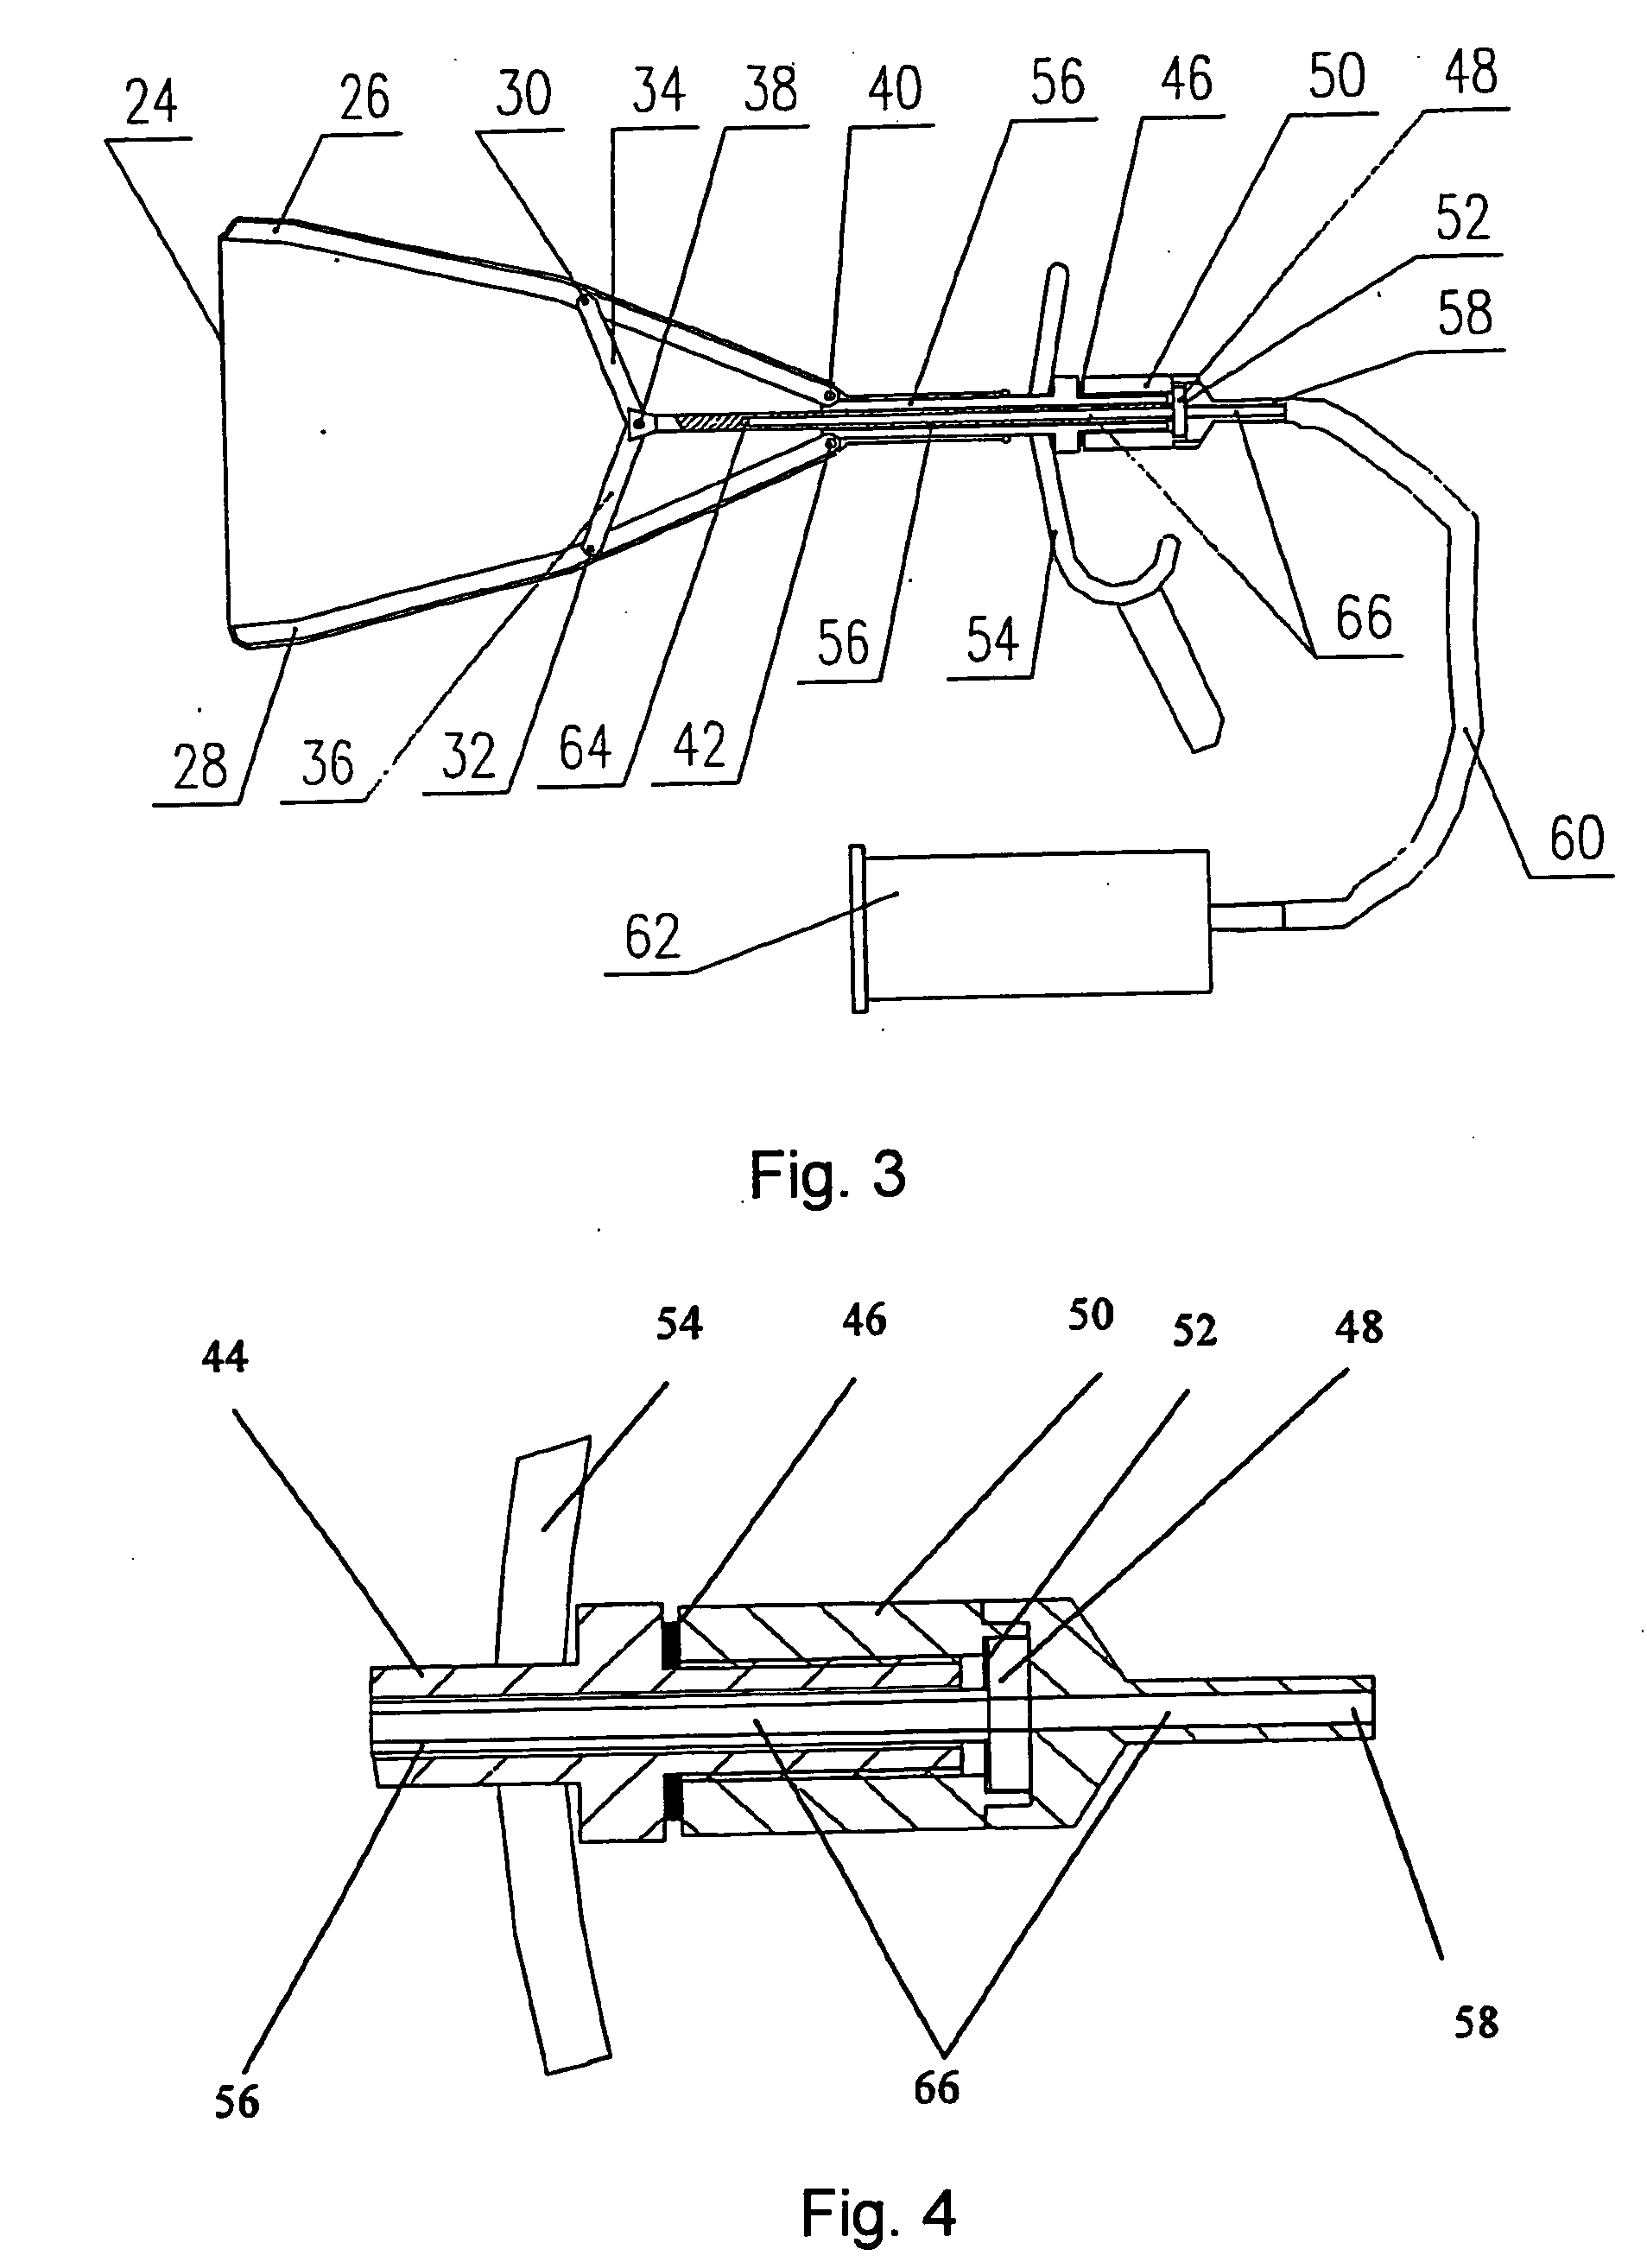 Apparatus for Body Cavity Delivery with Medium, Body Cavity Leading-in and Ultrasound Block